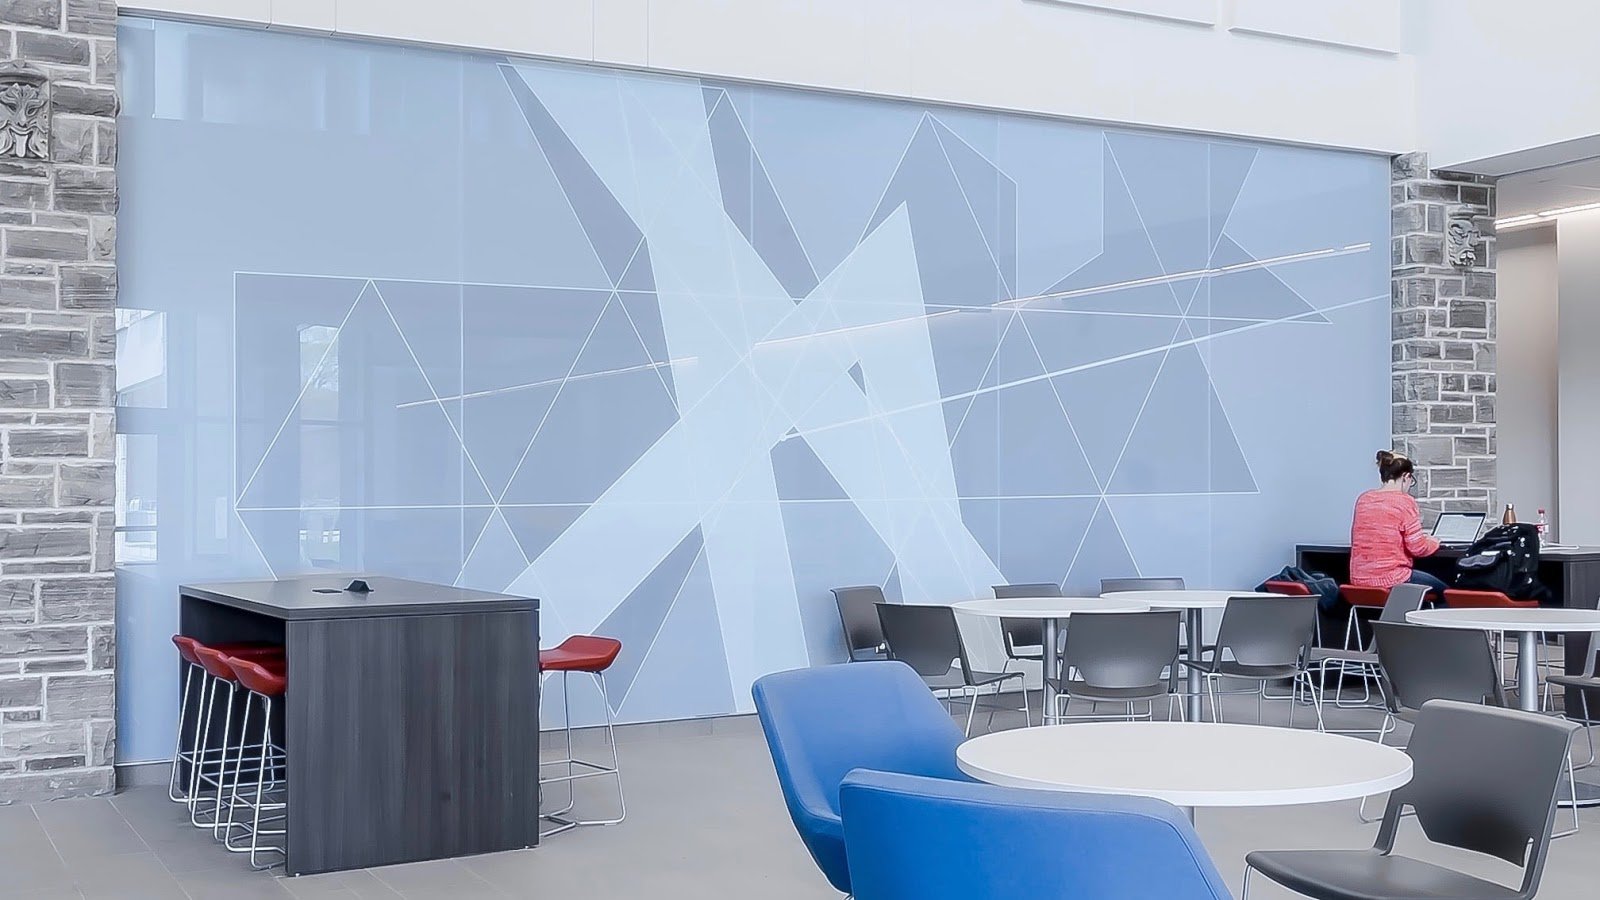 Reinforce a Company Brand with These 4 Modern Office Decor Ideas